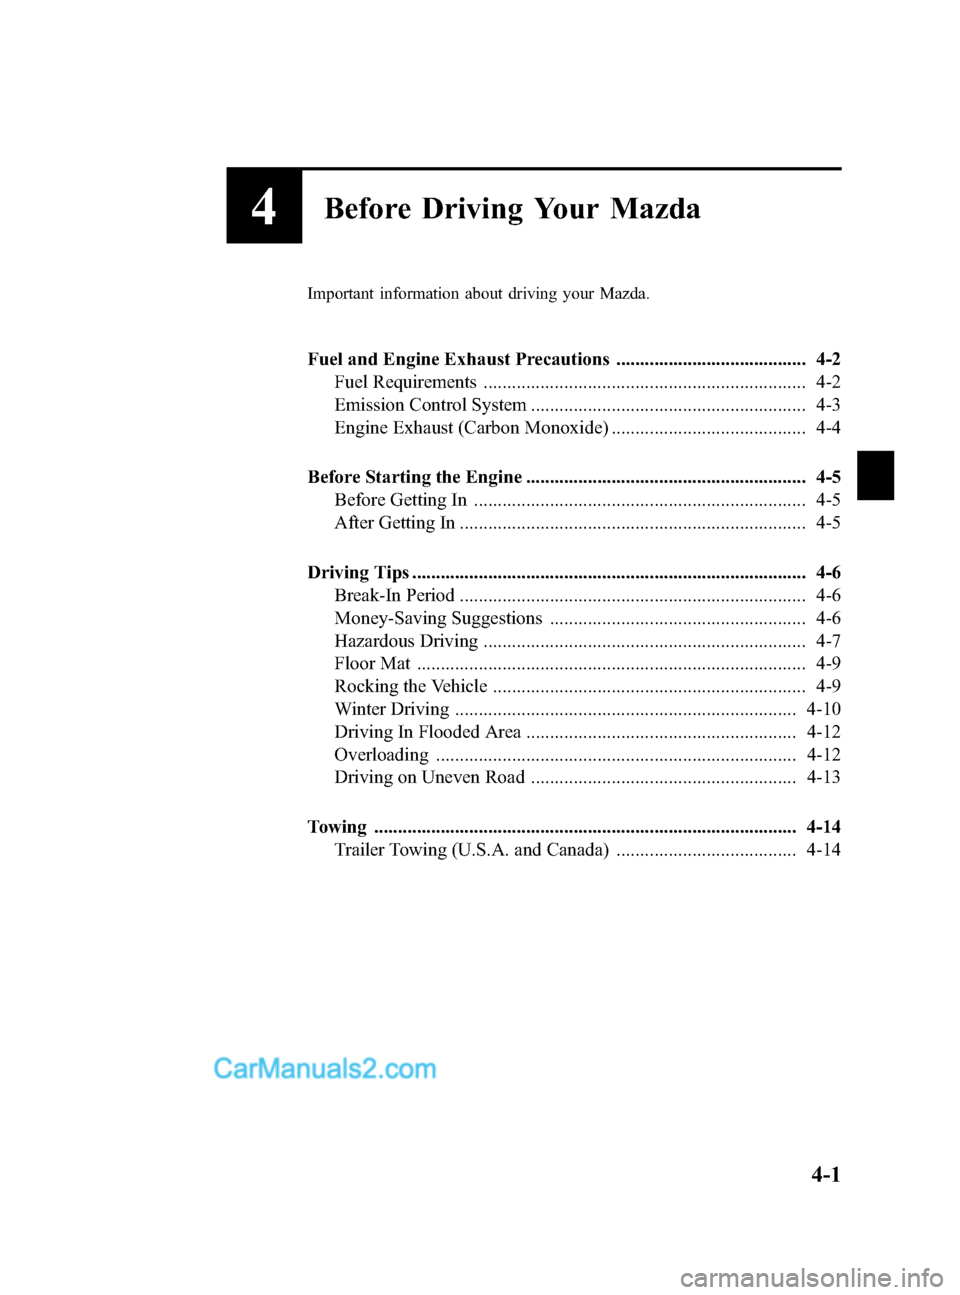 MAZDA MODEL CX-9 2015  Owners Manual (in English) Black plate (157,1)
4Before Driving Your Mazda
Important information about driving your Mazda.
Fuel and Engine Exhaust Precautions ........................................ 4-2Fuel Requirements .......